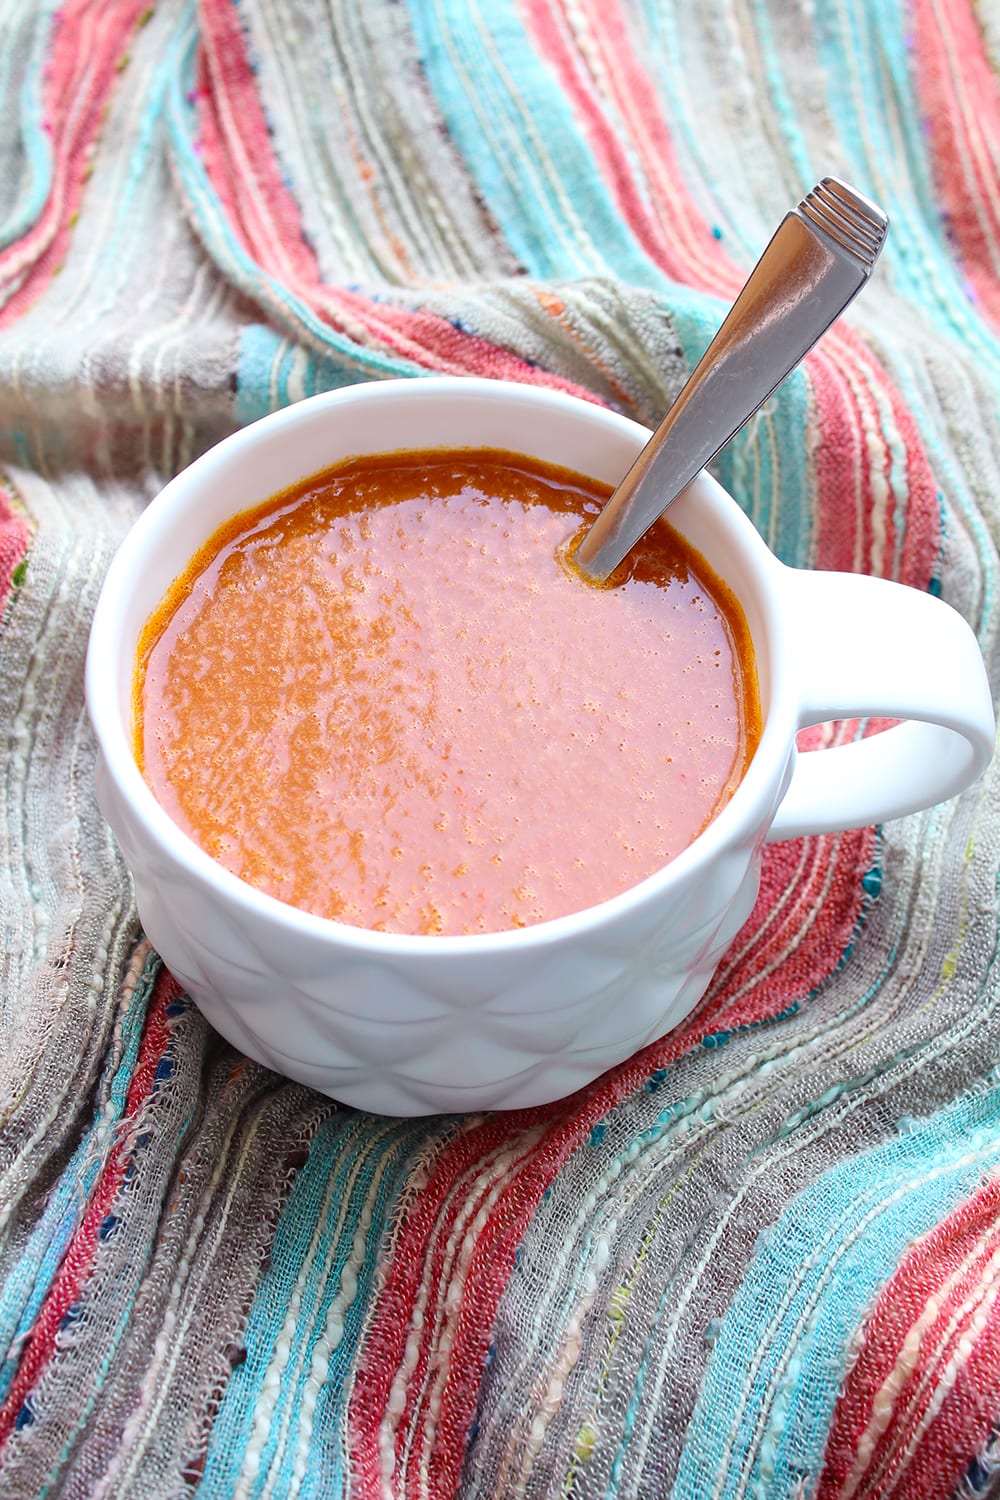 This basic tomato soup recipe is a great base for other soups. Try adding black beans, onions, peppers, corn and cumin to turn it into a Southwest style soup. You can also add plain rice or macaroni to make it a bit heartier!